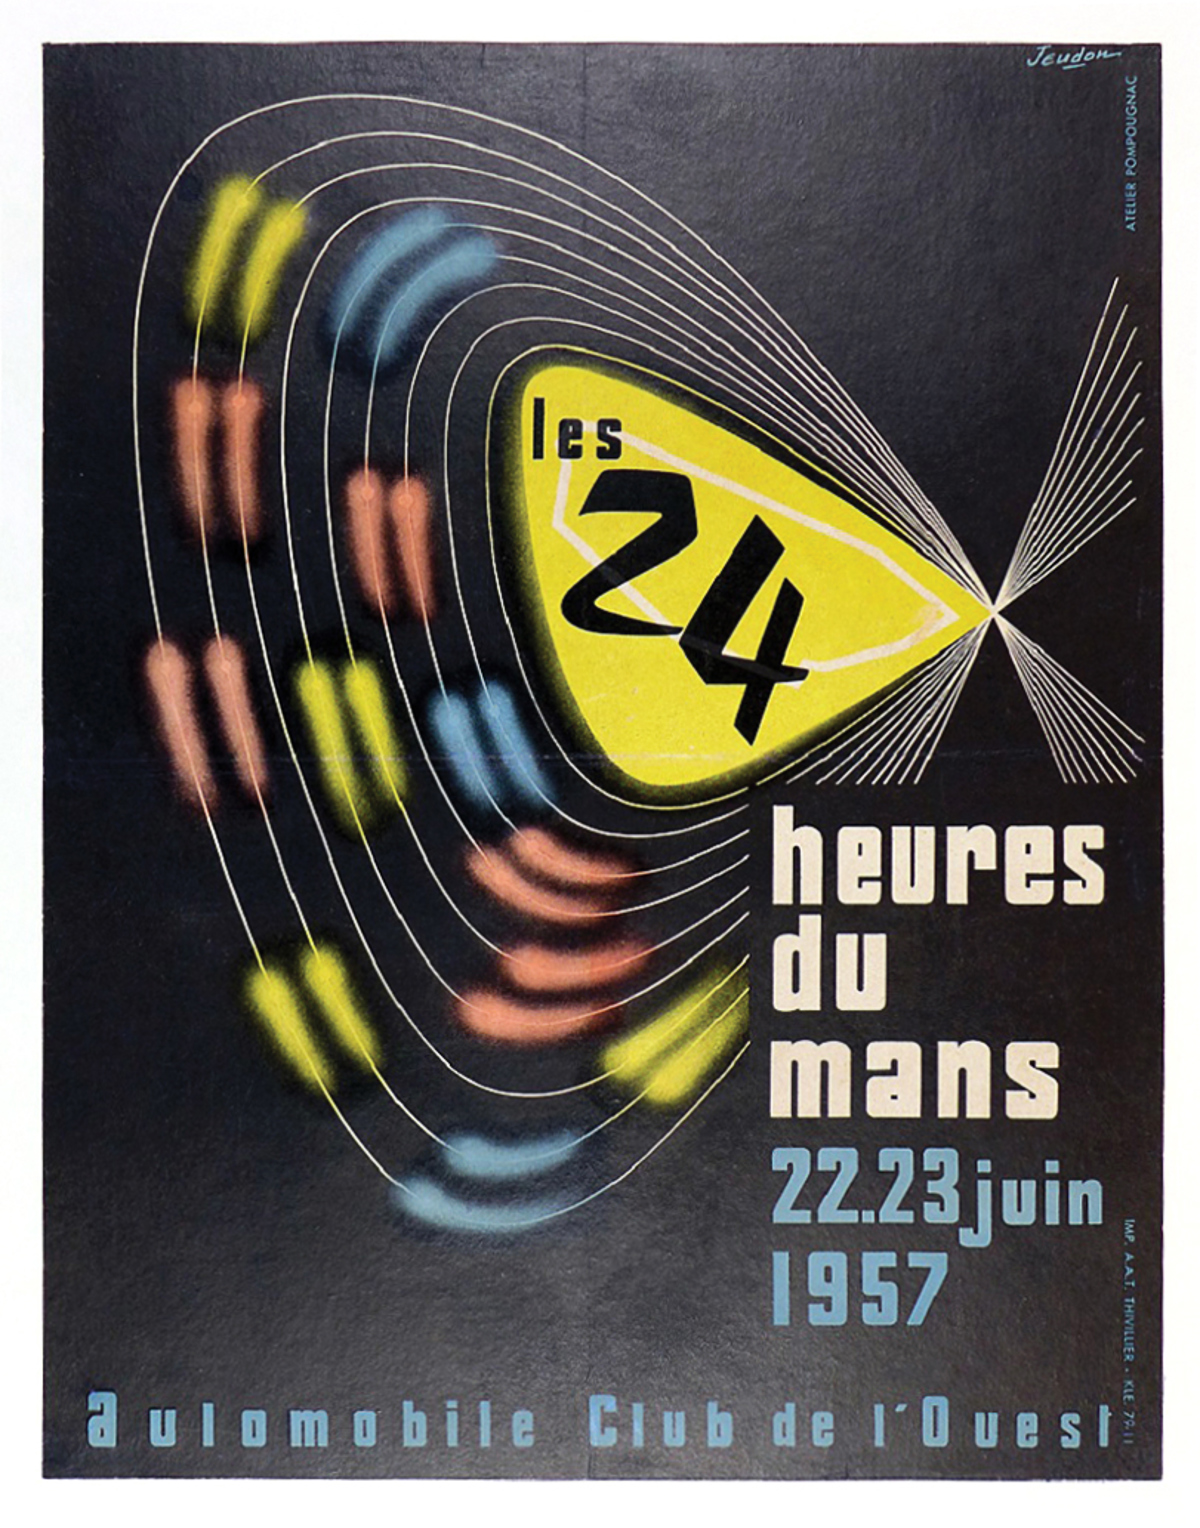 Les 24 Heures du Mans 1957 offered in RM Sotheby’s Original Racing Posters online auction